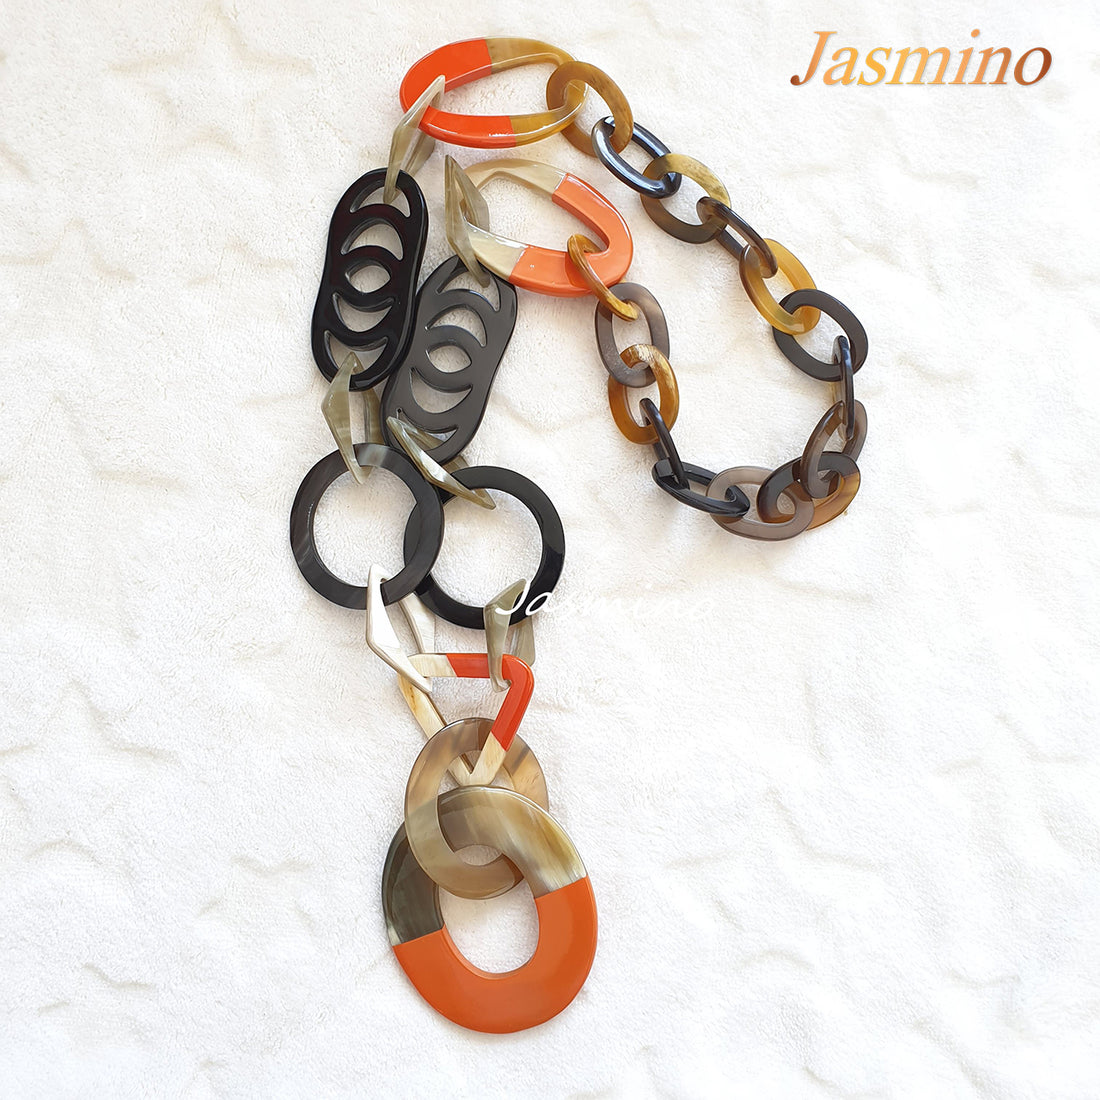 The necklace has large pieces with half natural horn and half orange peel lacquer, unique gift for her